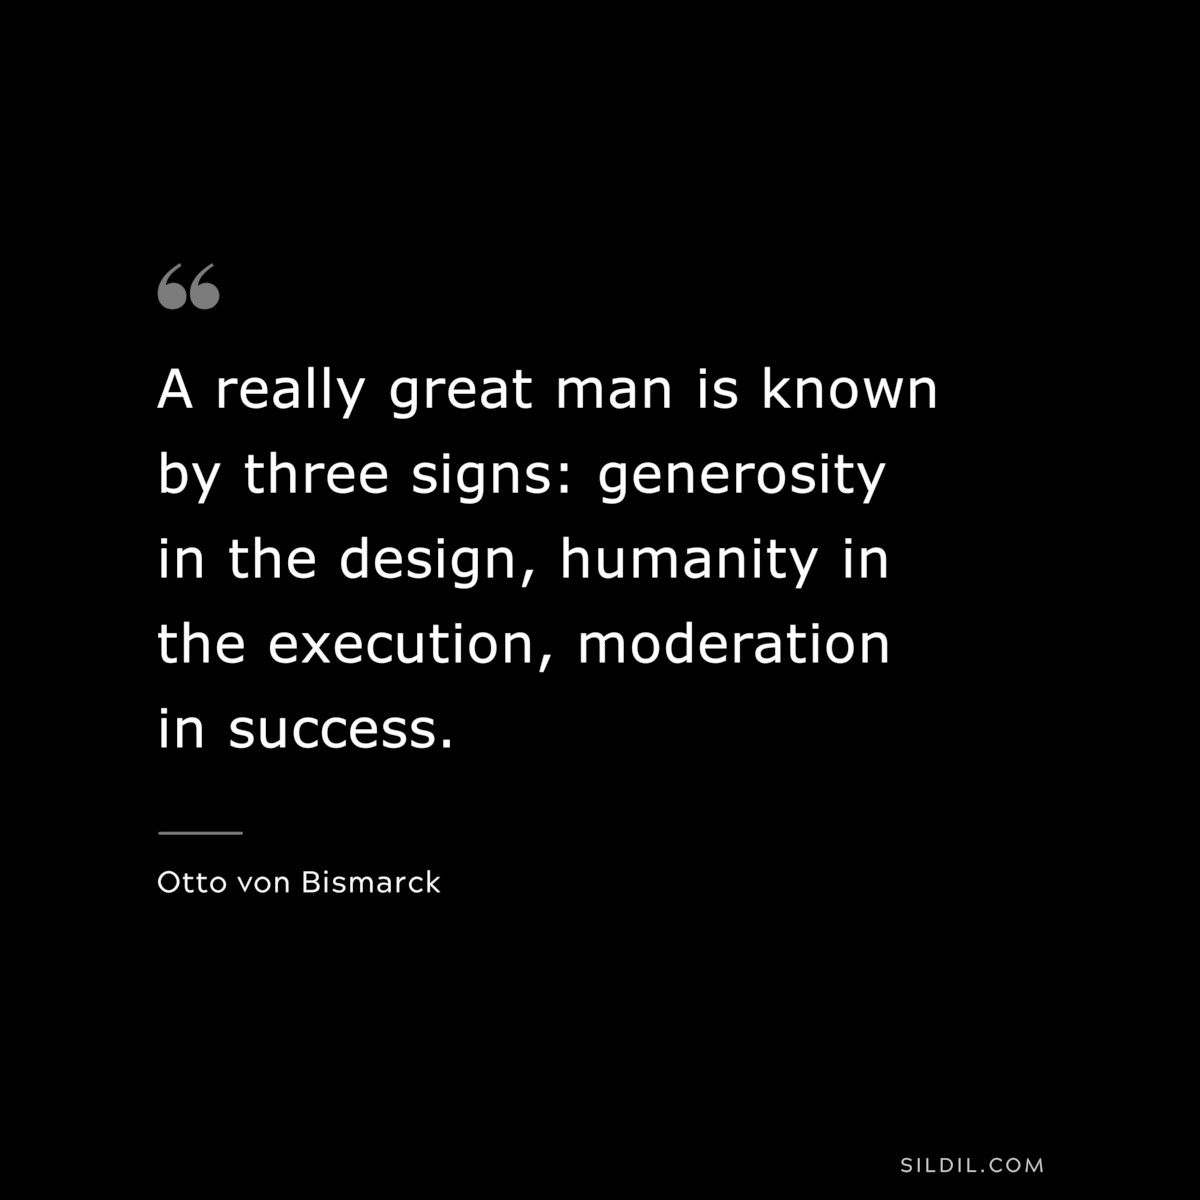 A really great man is known by three signs: generosity in the design, humanity in the execution, moderation in success. ― Otto von Bismarck